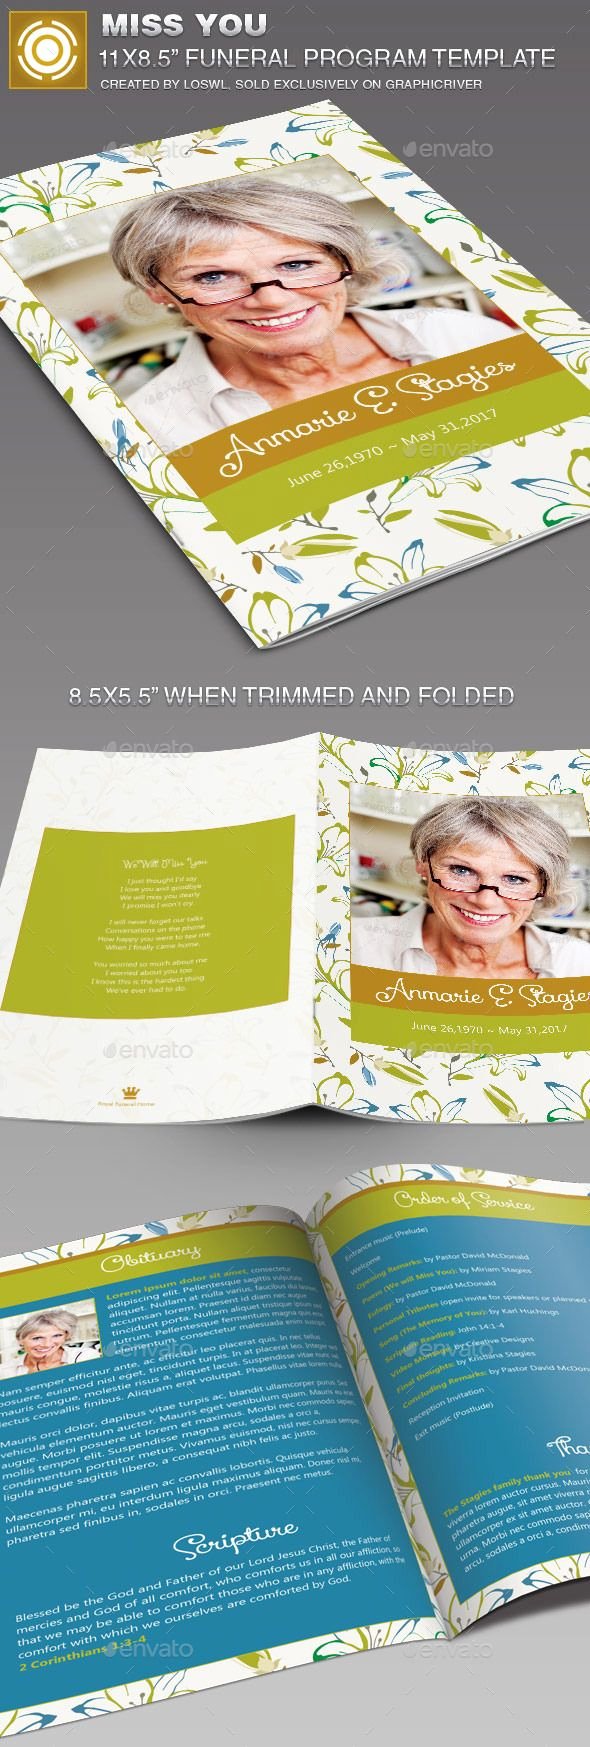 Funeral Program Template Indesign Fresh Miss You Funeral Program Template